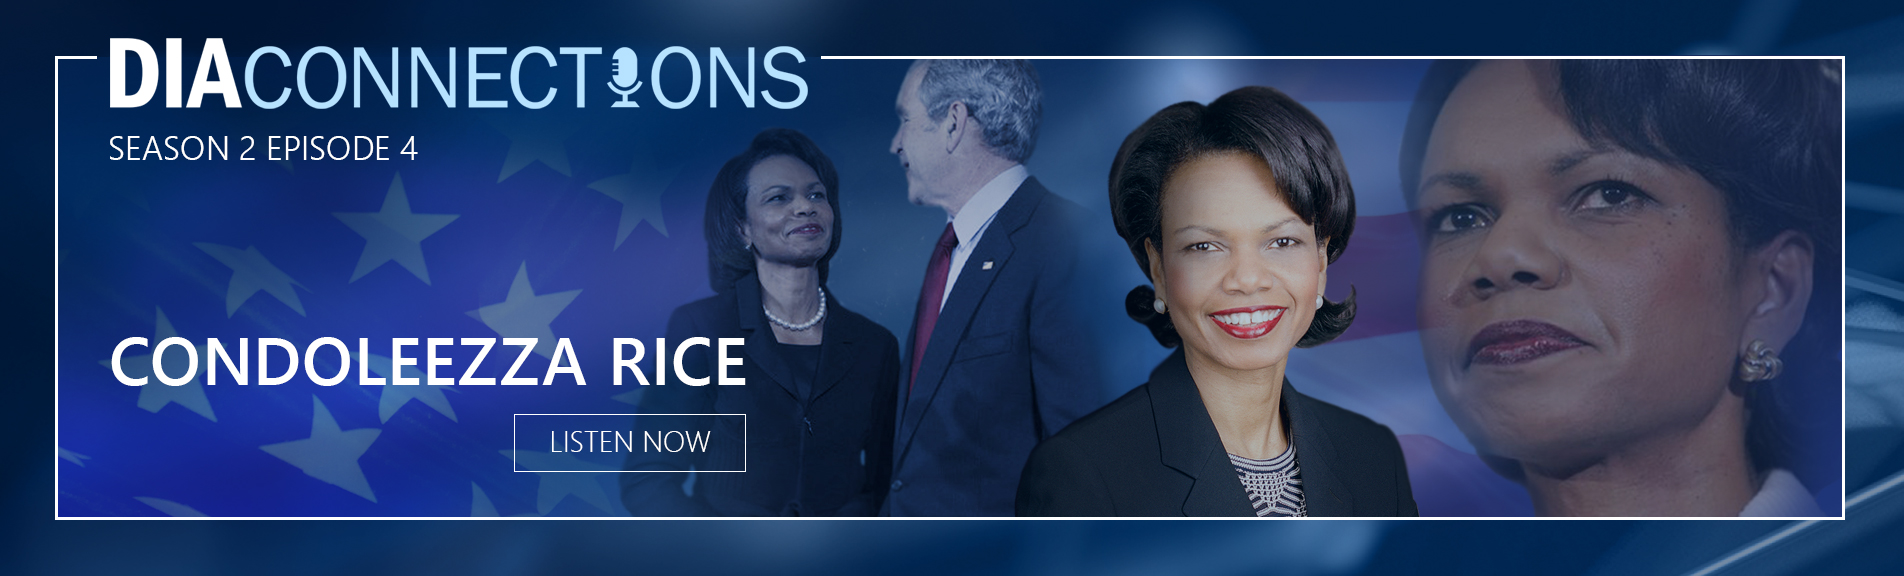 Feature graphic showing Condoleezza Rice in three spots, one talking to former President George Bush. Main title. D.I.A. Connections. Season 2. Episode 4. Subtitle. Condoleezza Rice.